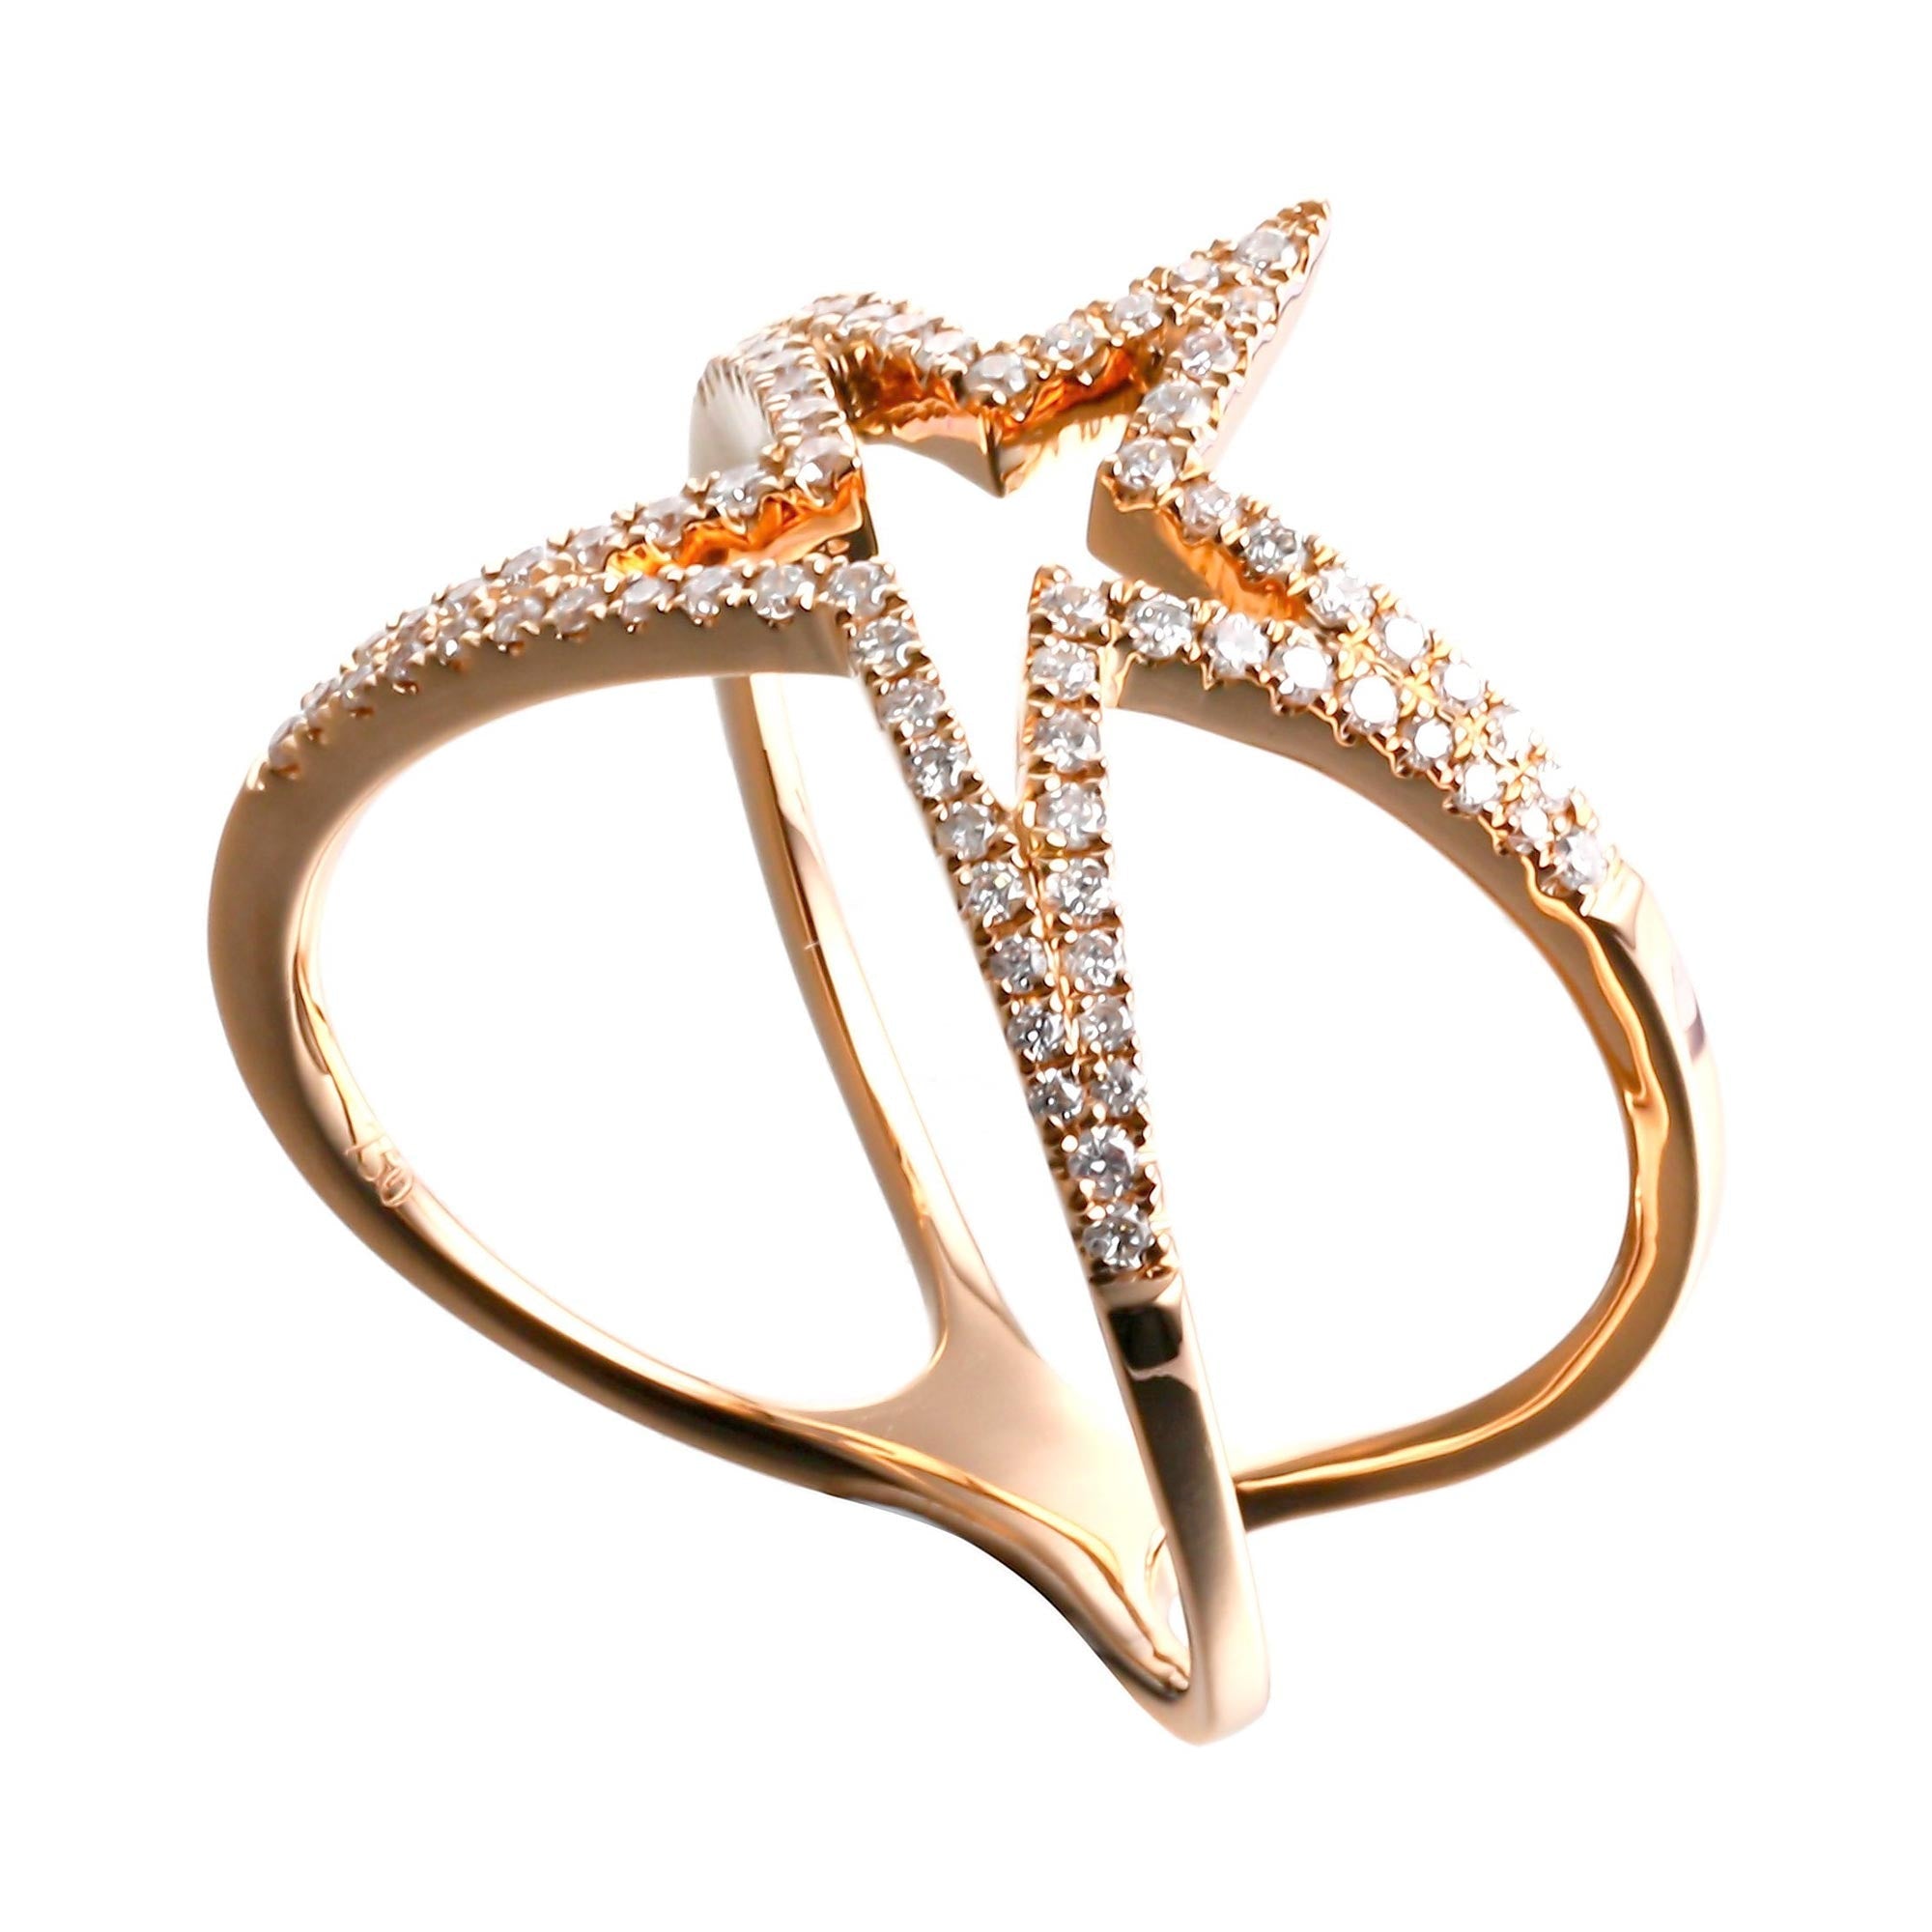 Adjustable Star Shaped Ring | Star Shaped Ring Design | Shiny Adjustable  Ring - Cubic - Aliexpress